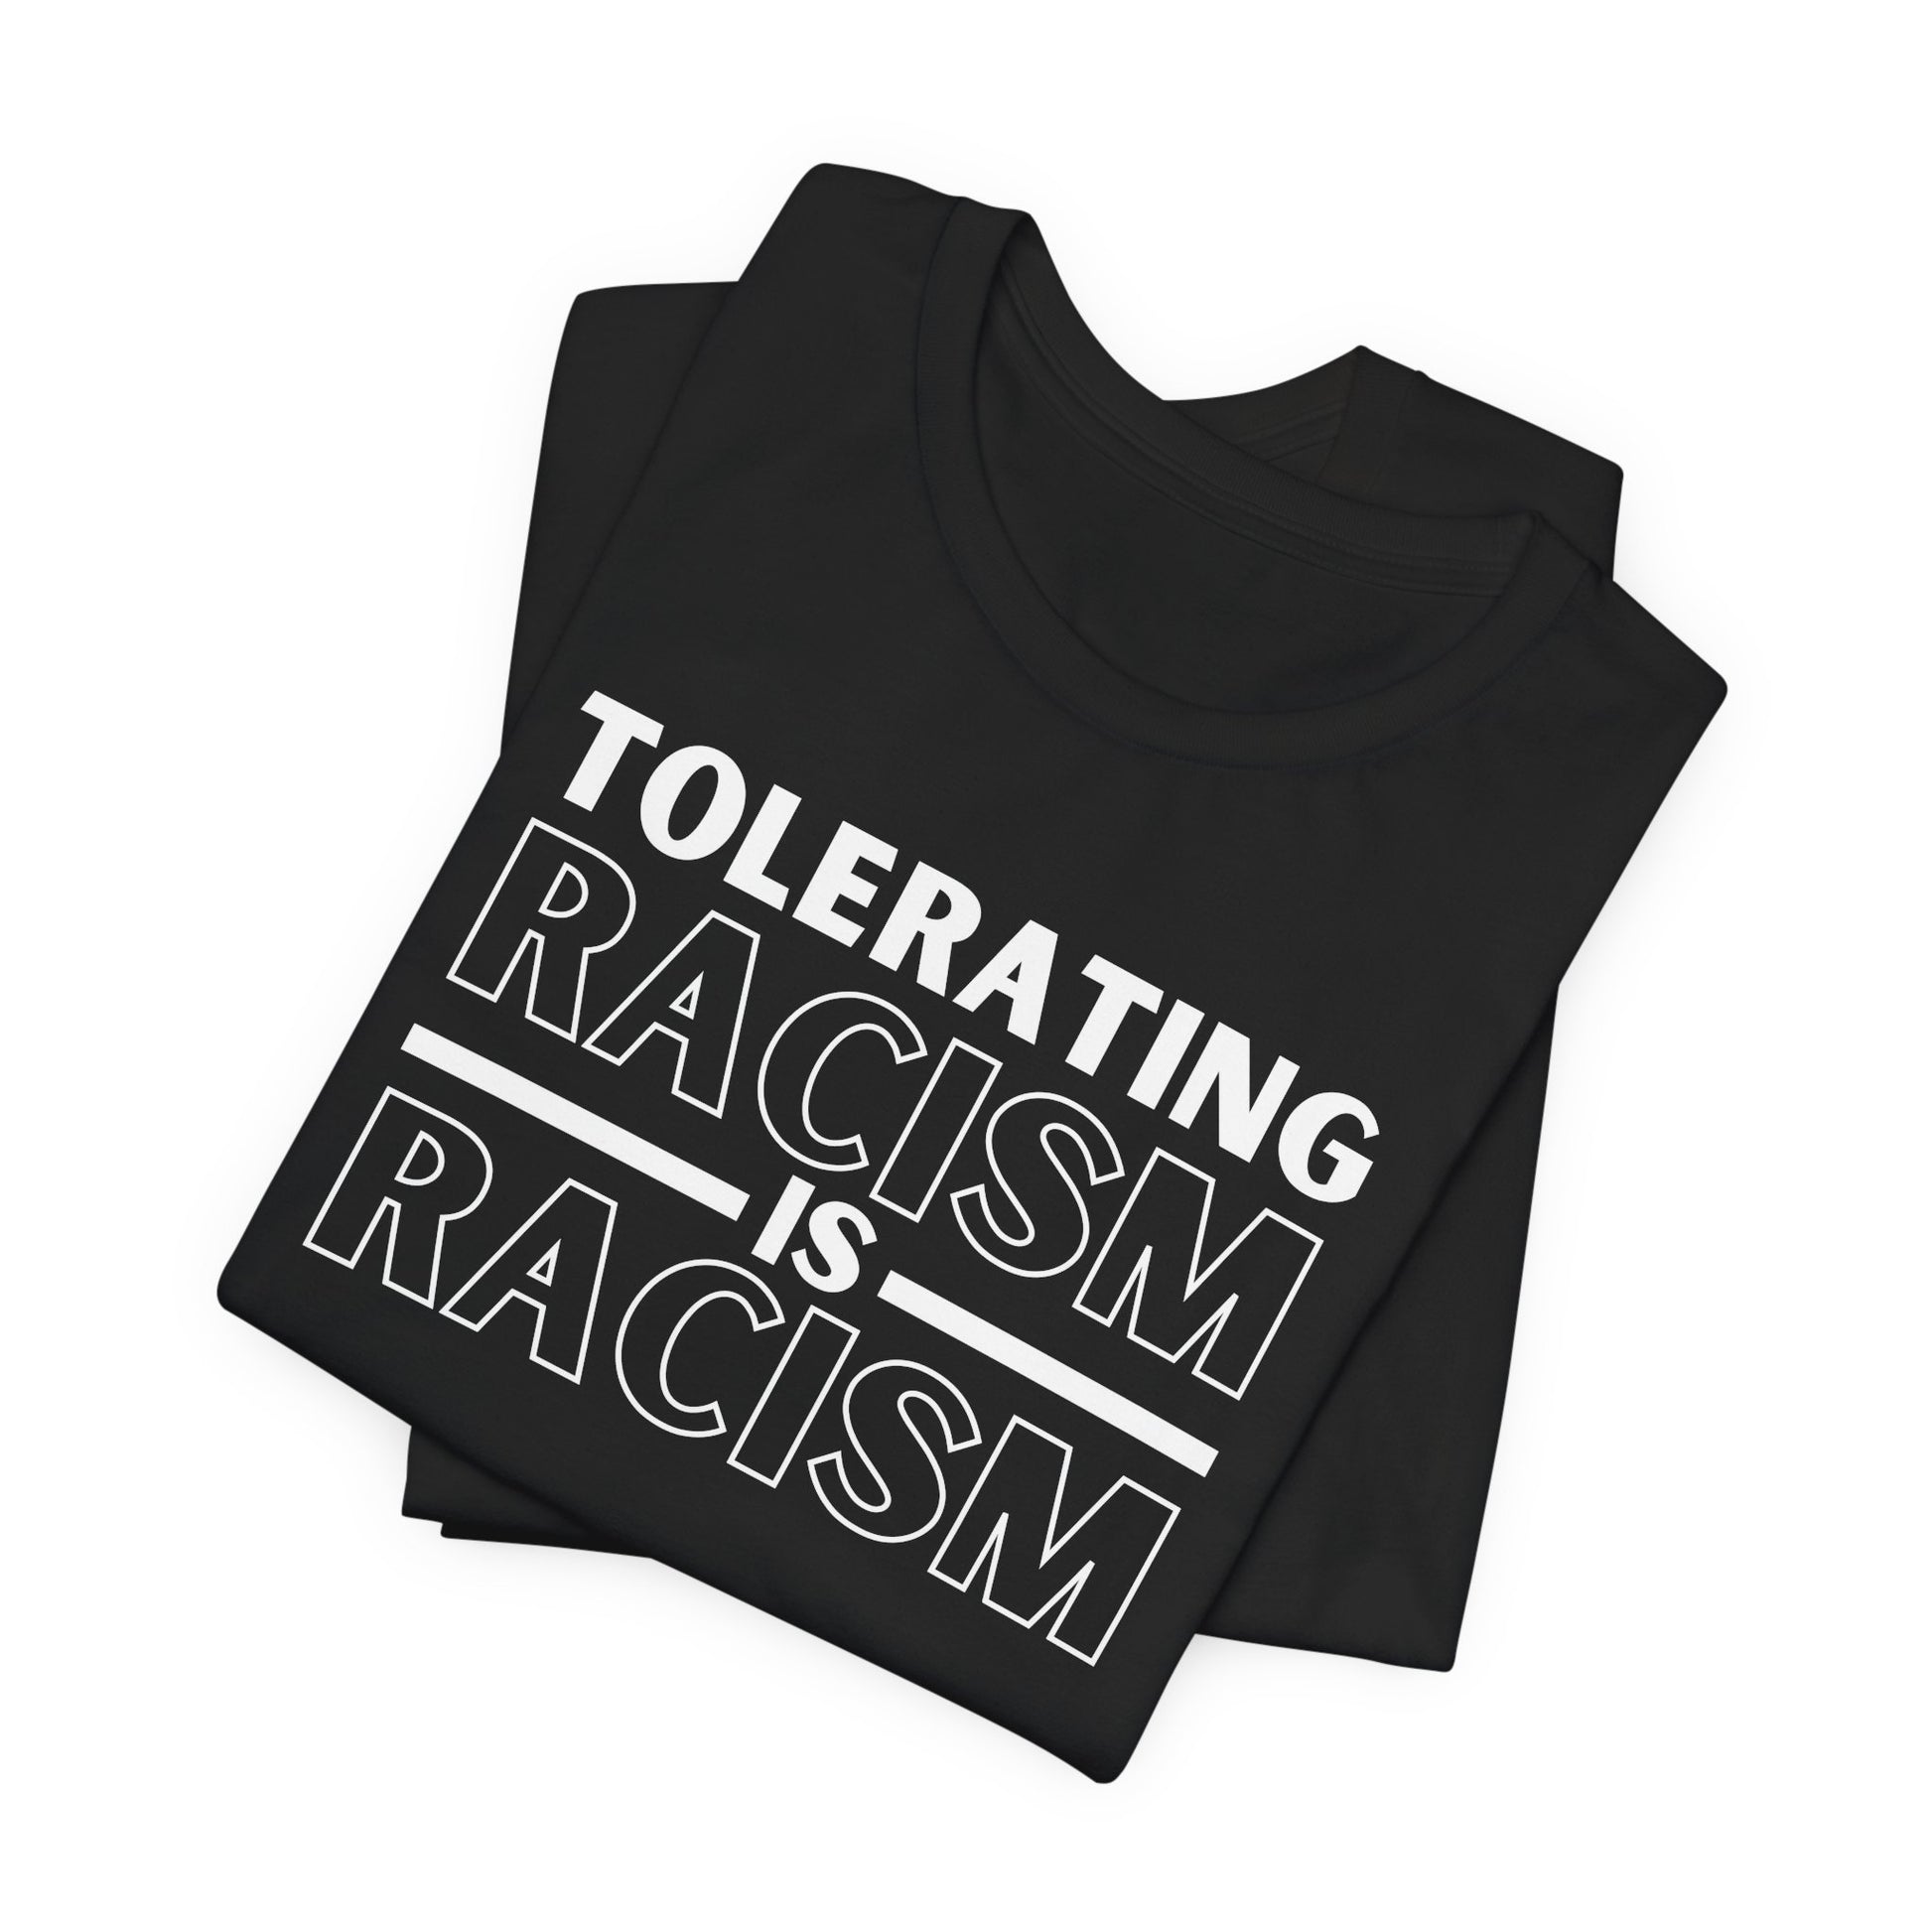 T-shirt to encourage a culture of awareness and action against discrimination - design states "tolerating racism is racism". Bella canvas 3001 t-shirt in black.